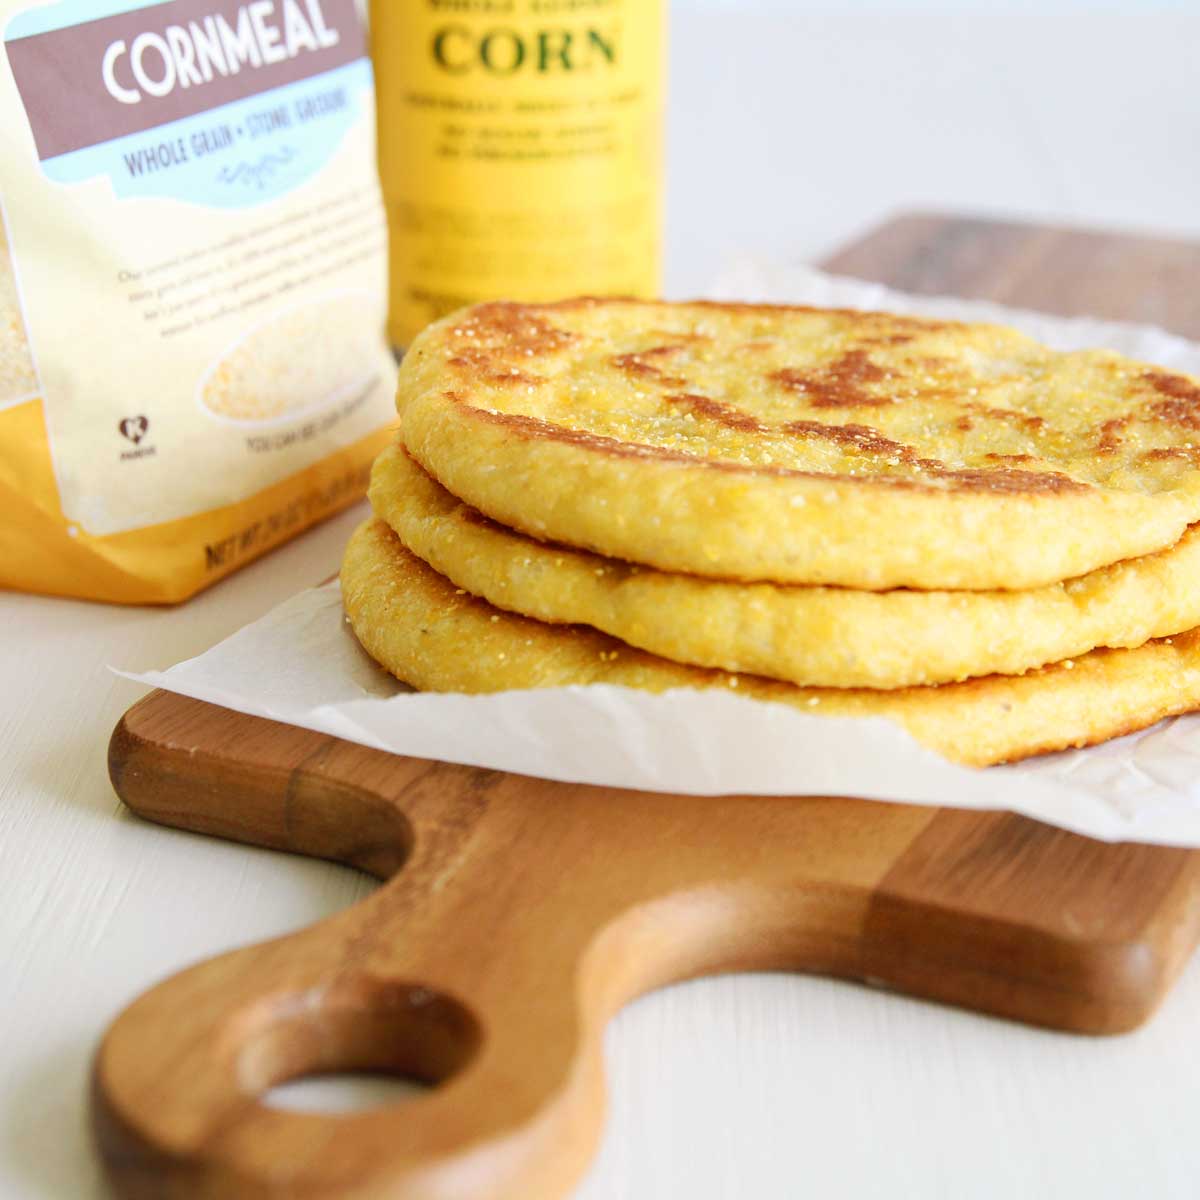 The Best Cornmeal Pizza Crust Recipe - with Canned Corn Puree - Cornmeal Pizza Crust